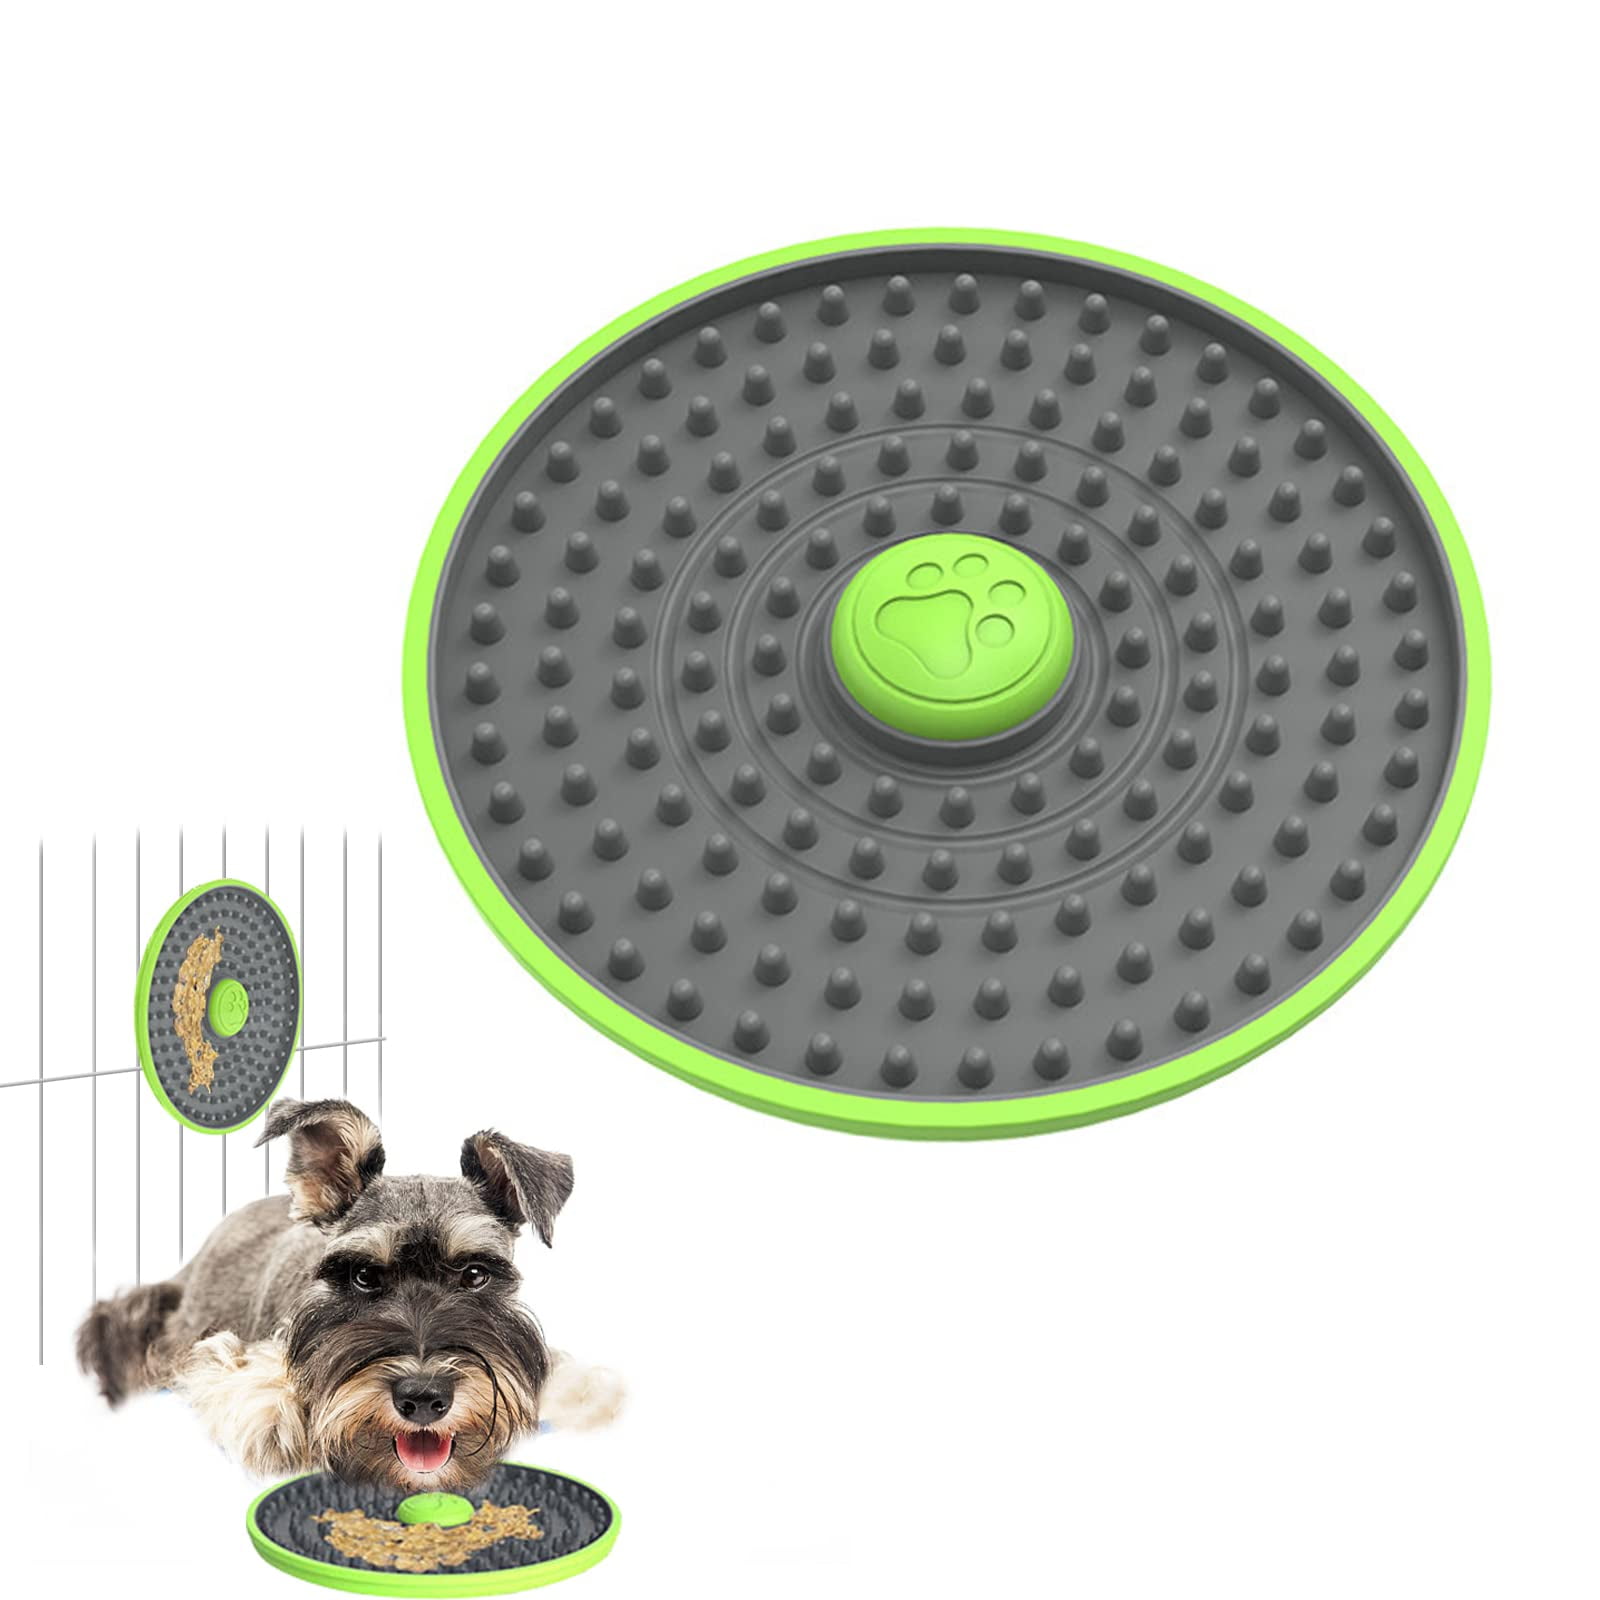 Dog Slow Lick Mat for Cage, Coniengk Feeders Lick Mat for Dogs, Crate  Training Toy/Tools Aids for Puppies to Aid Pets Digestion, Relieve Anxiety  and